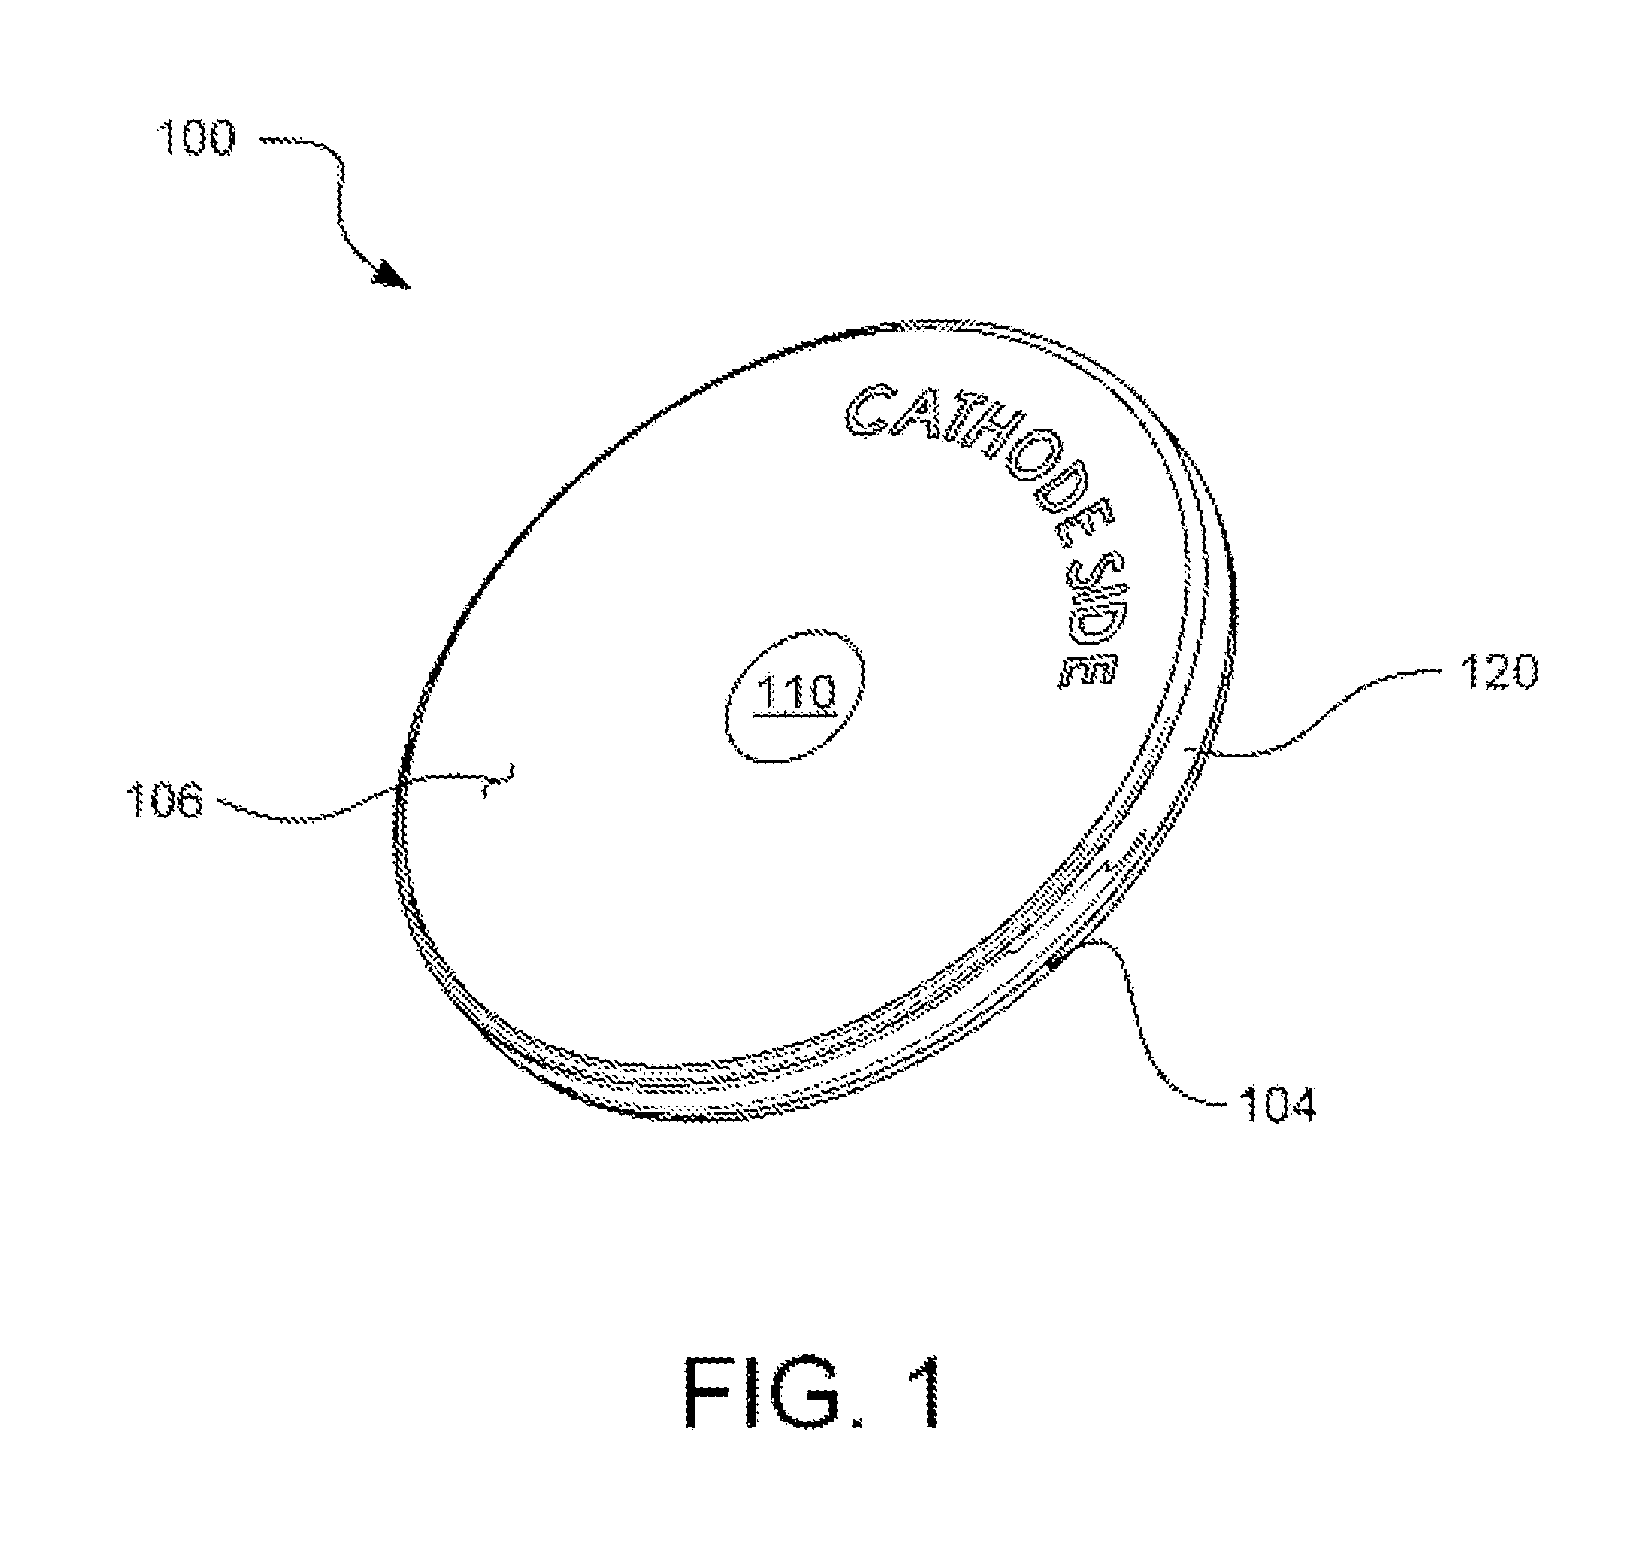 Circuits and Methods for Using a High Impedance, Thin, Coin-Cell Type Battery in an Implantable Electroacupuncture Device